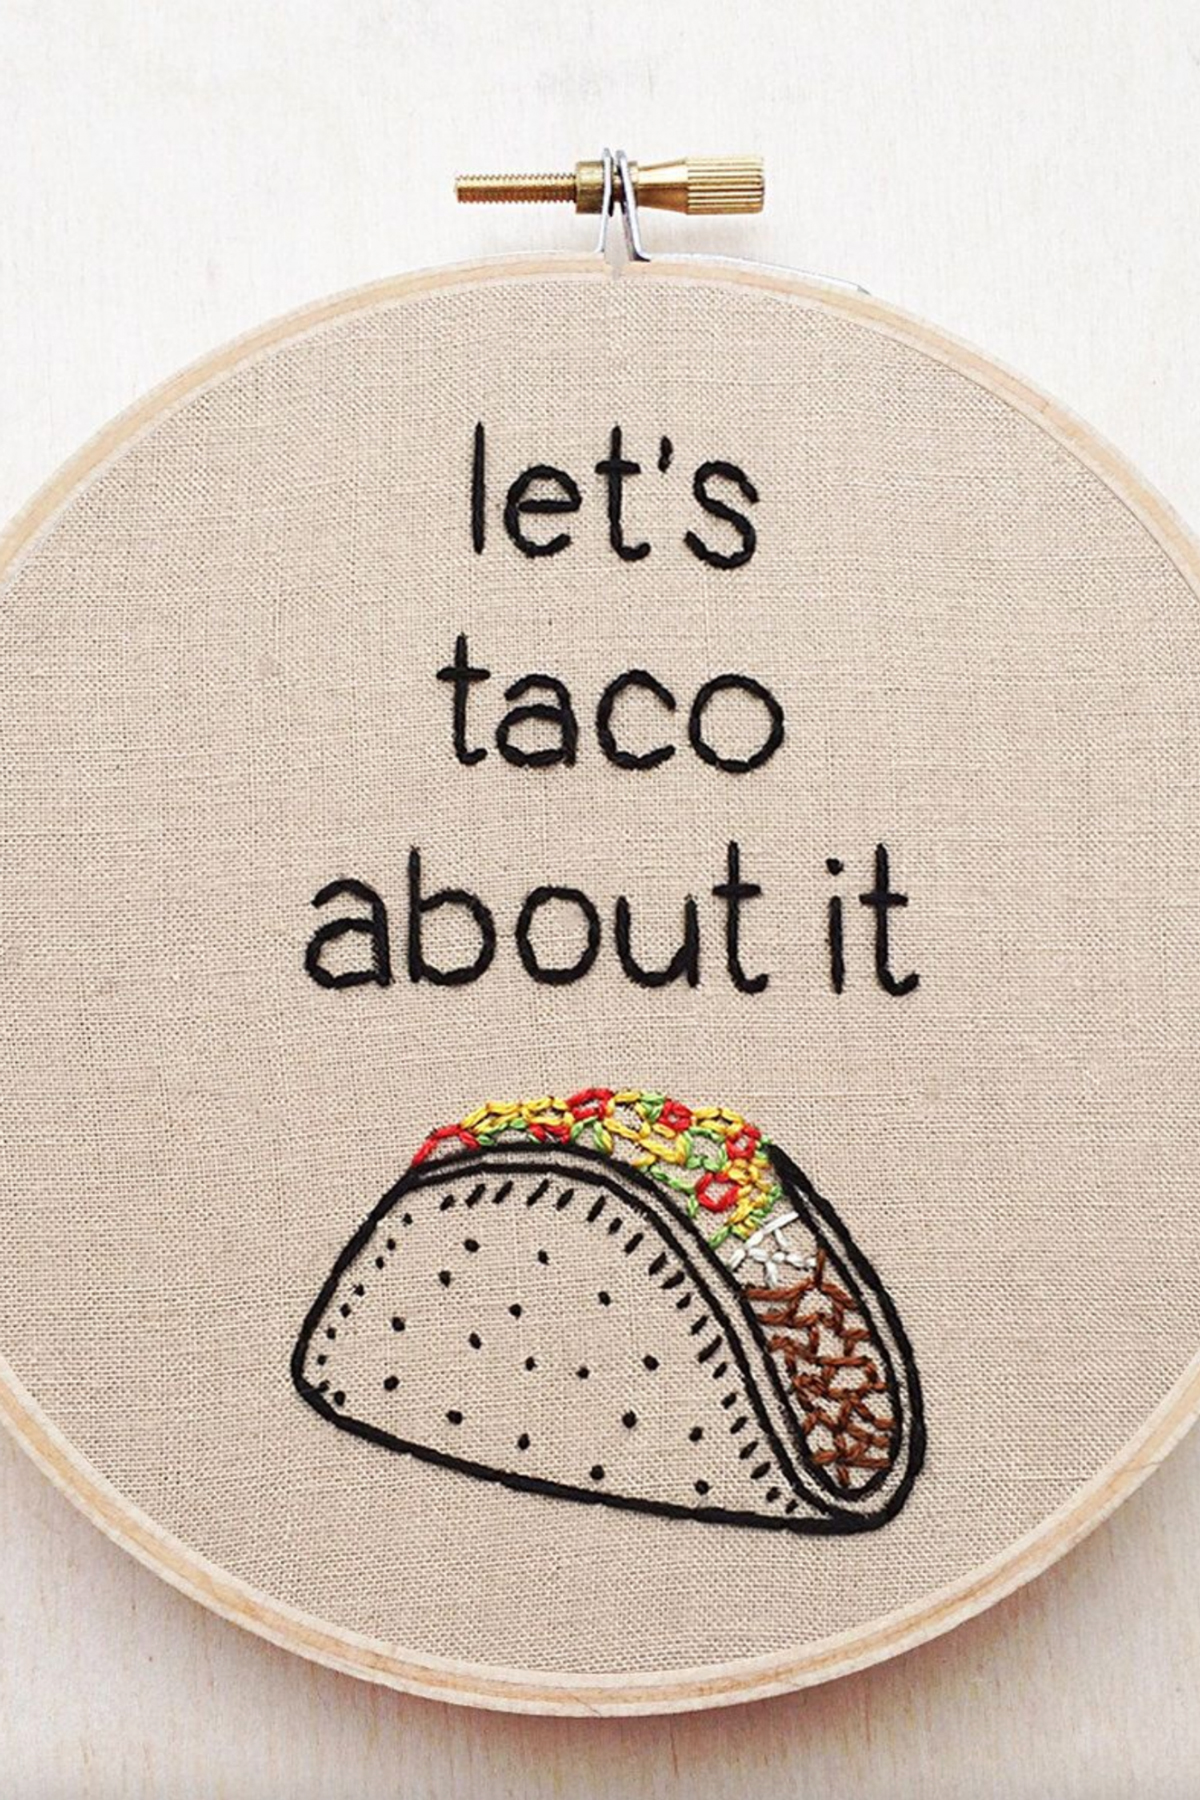 Funny embroidery patterns with puns and words